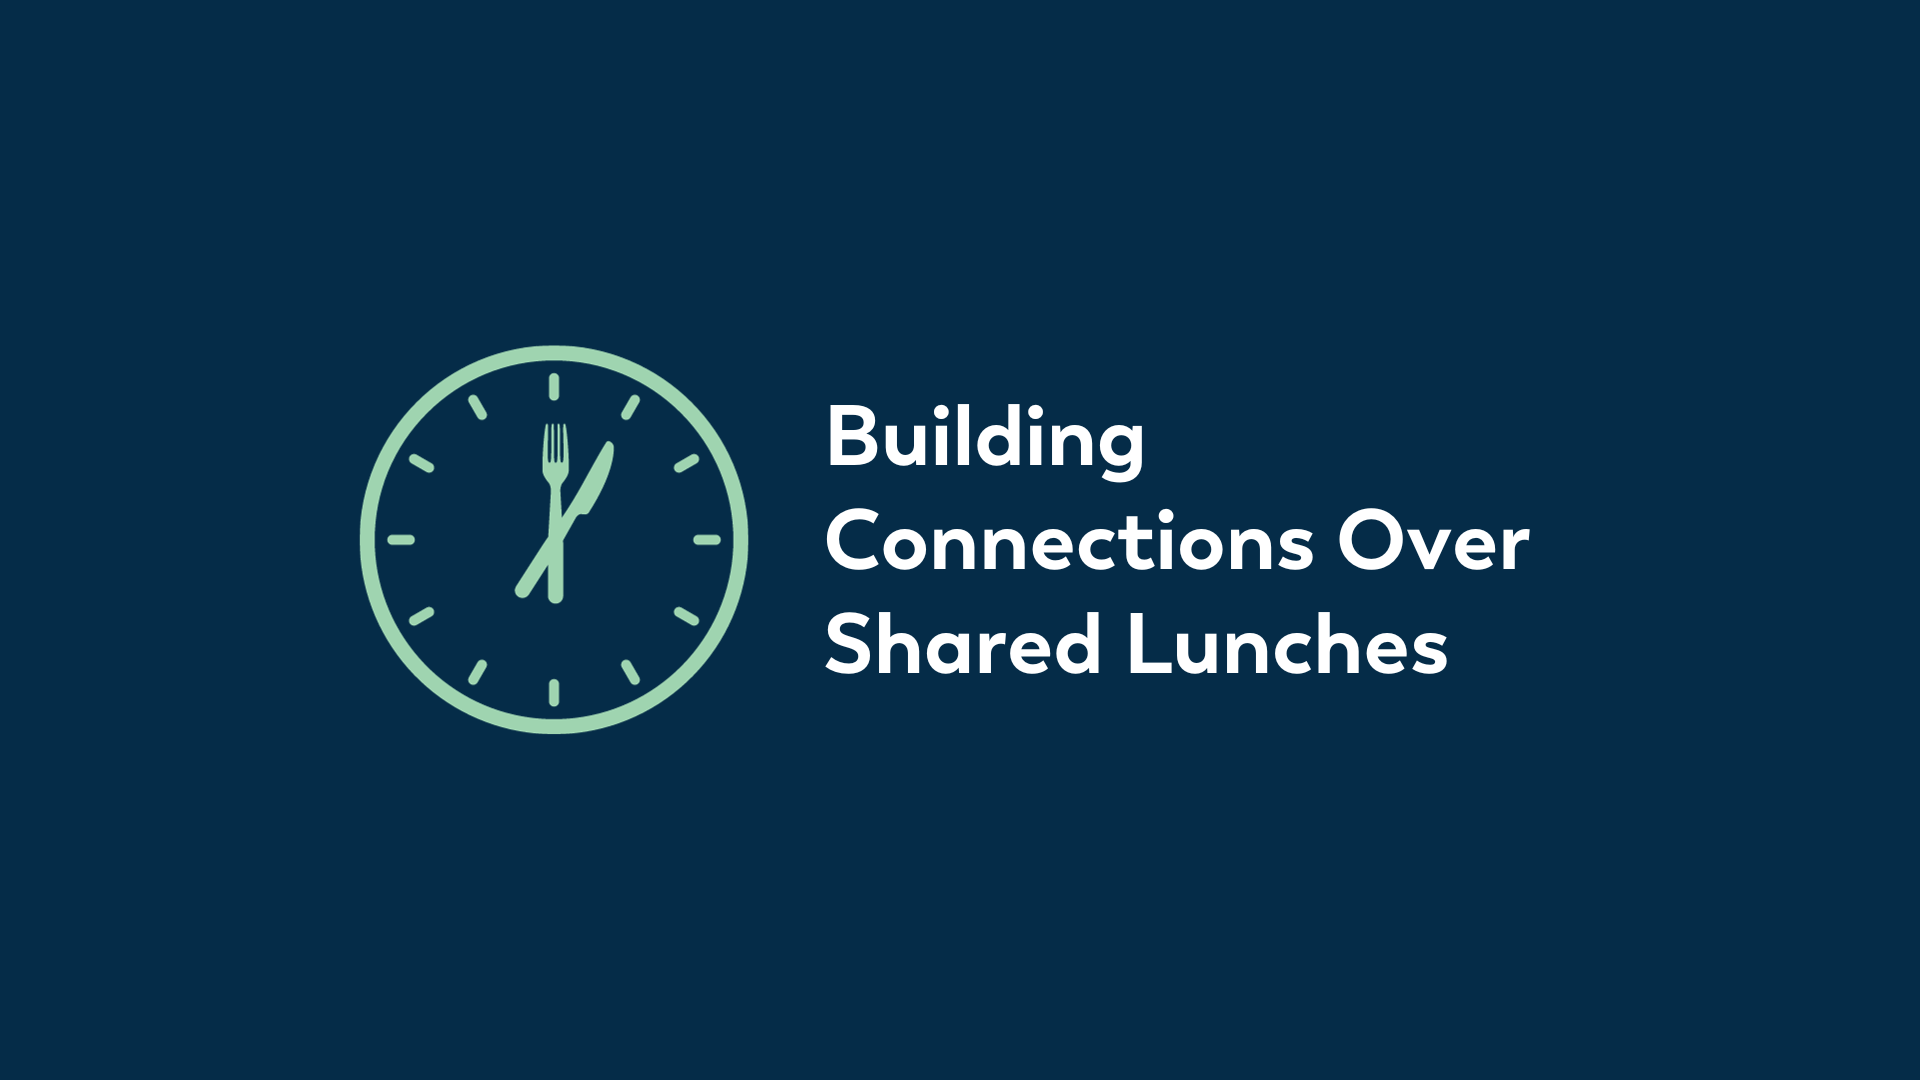 Featured image for “Building Connections Over Shared Lunches”